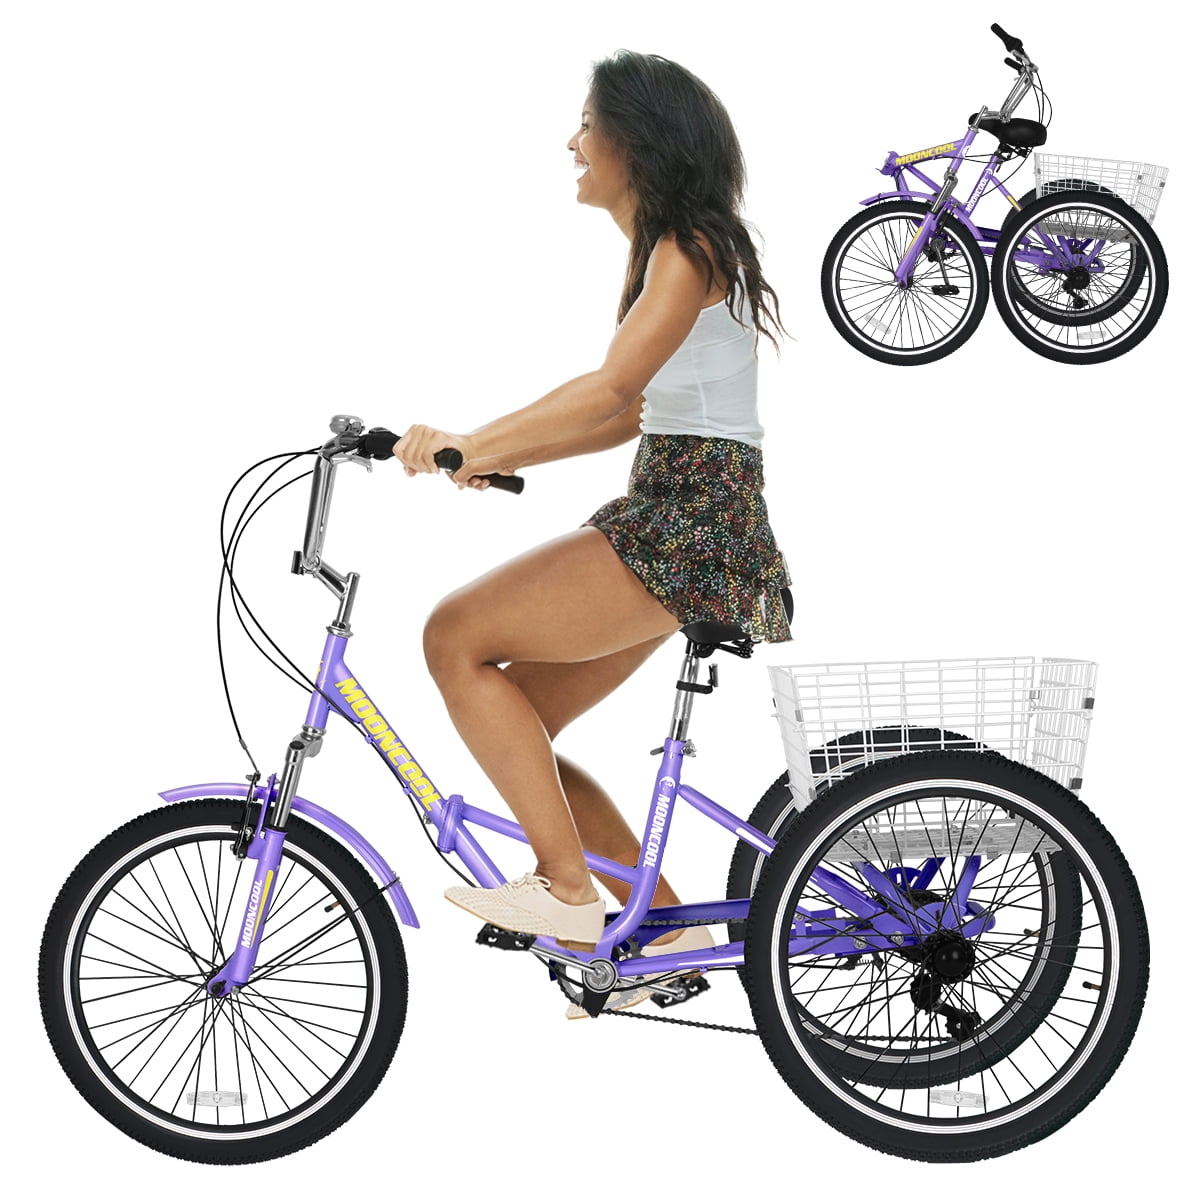 VANELL Tricycle Bike Teenager 3 Wheeled Bicycle 14/16 /20“/24”/26“ W/Large Size Basket for Shopping Exercise Recreation 